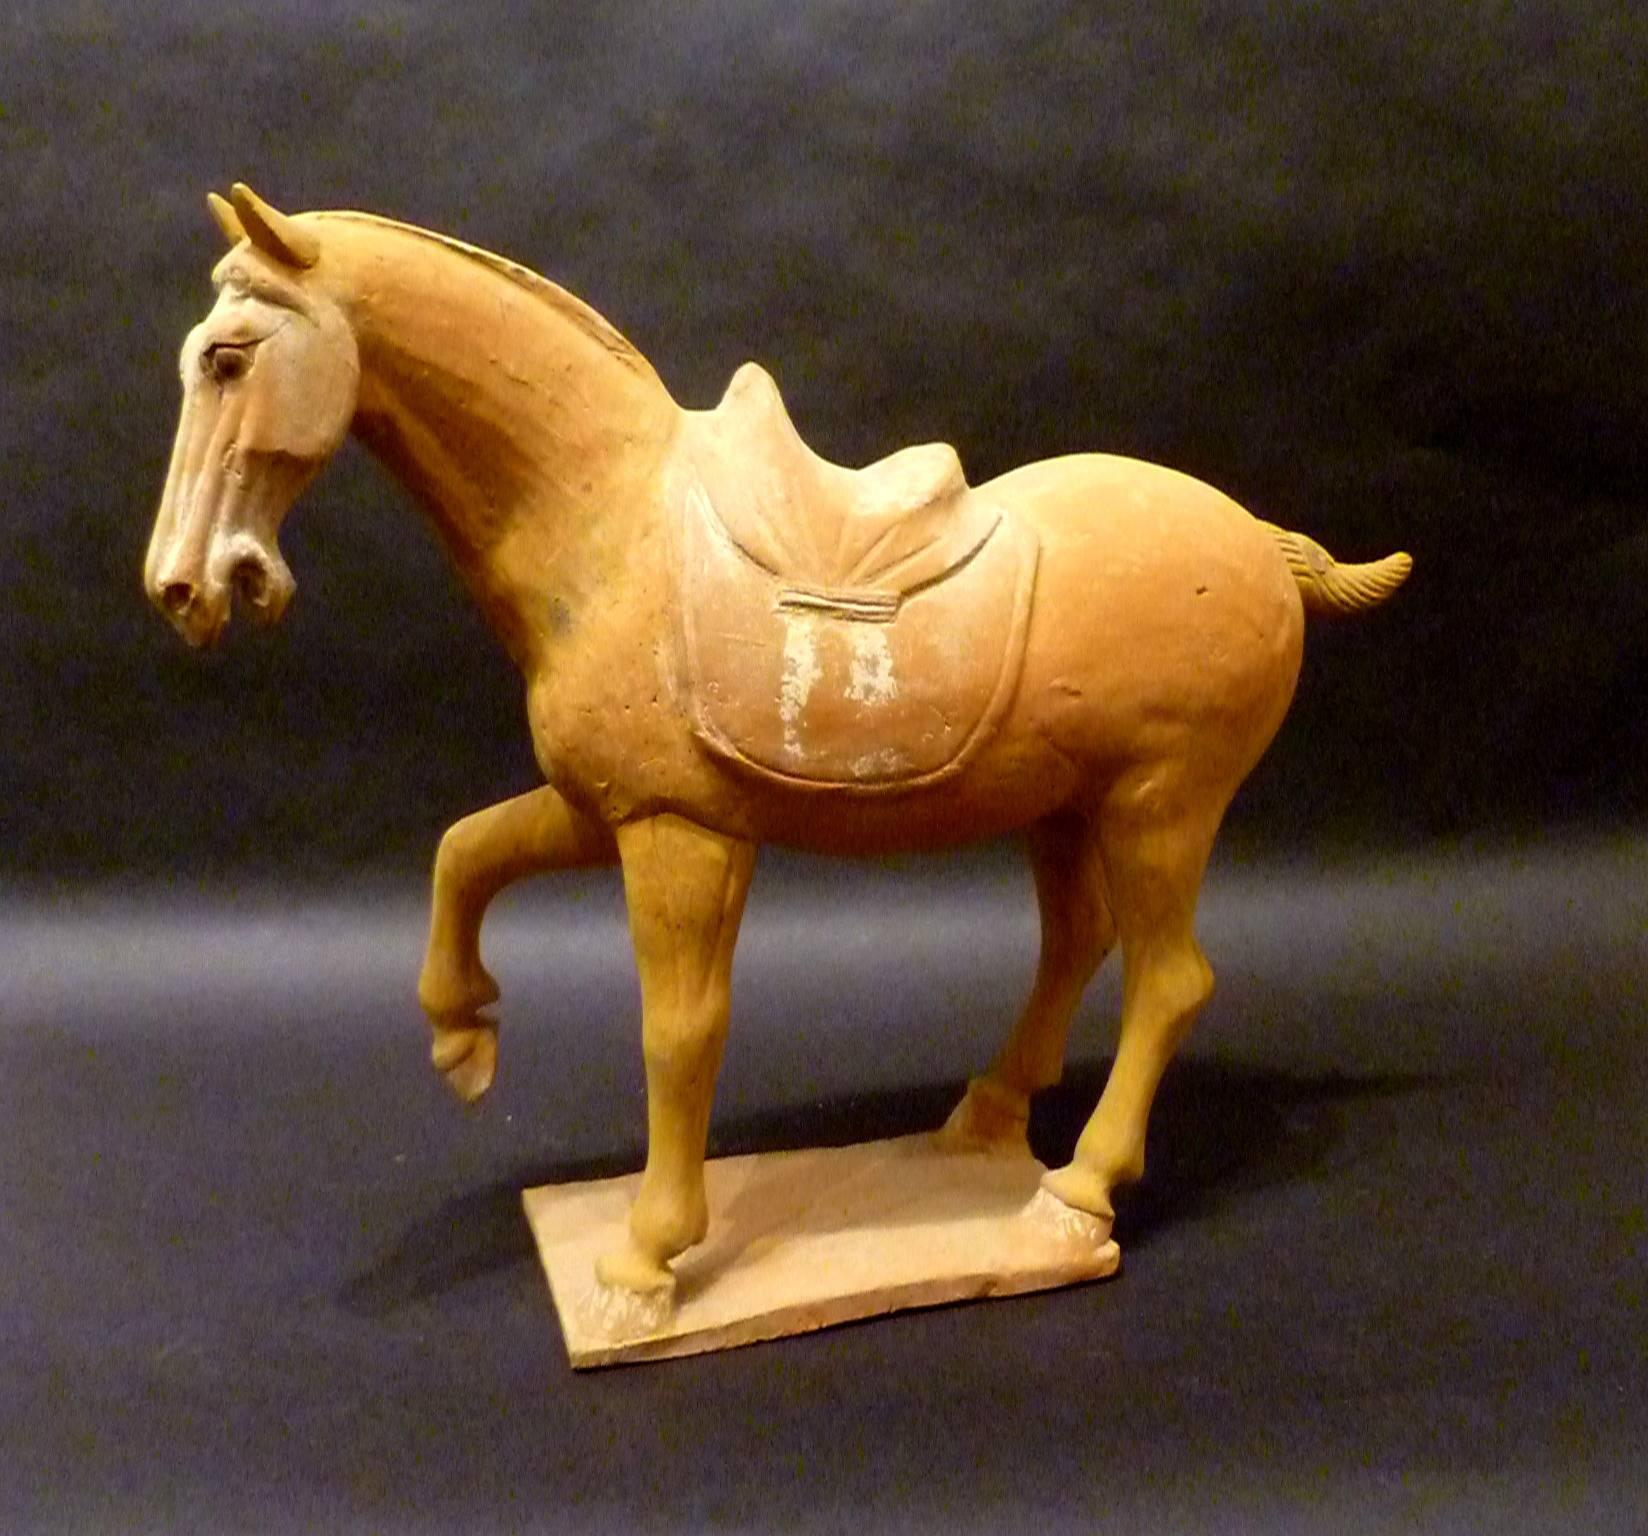 A naturalistically and lively modeled pottery statue of prancing horse, Tang dynasty 618-907, come with Oxford authentication TL test certificate.